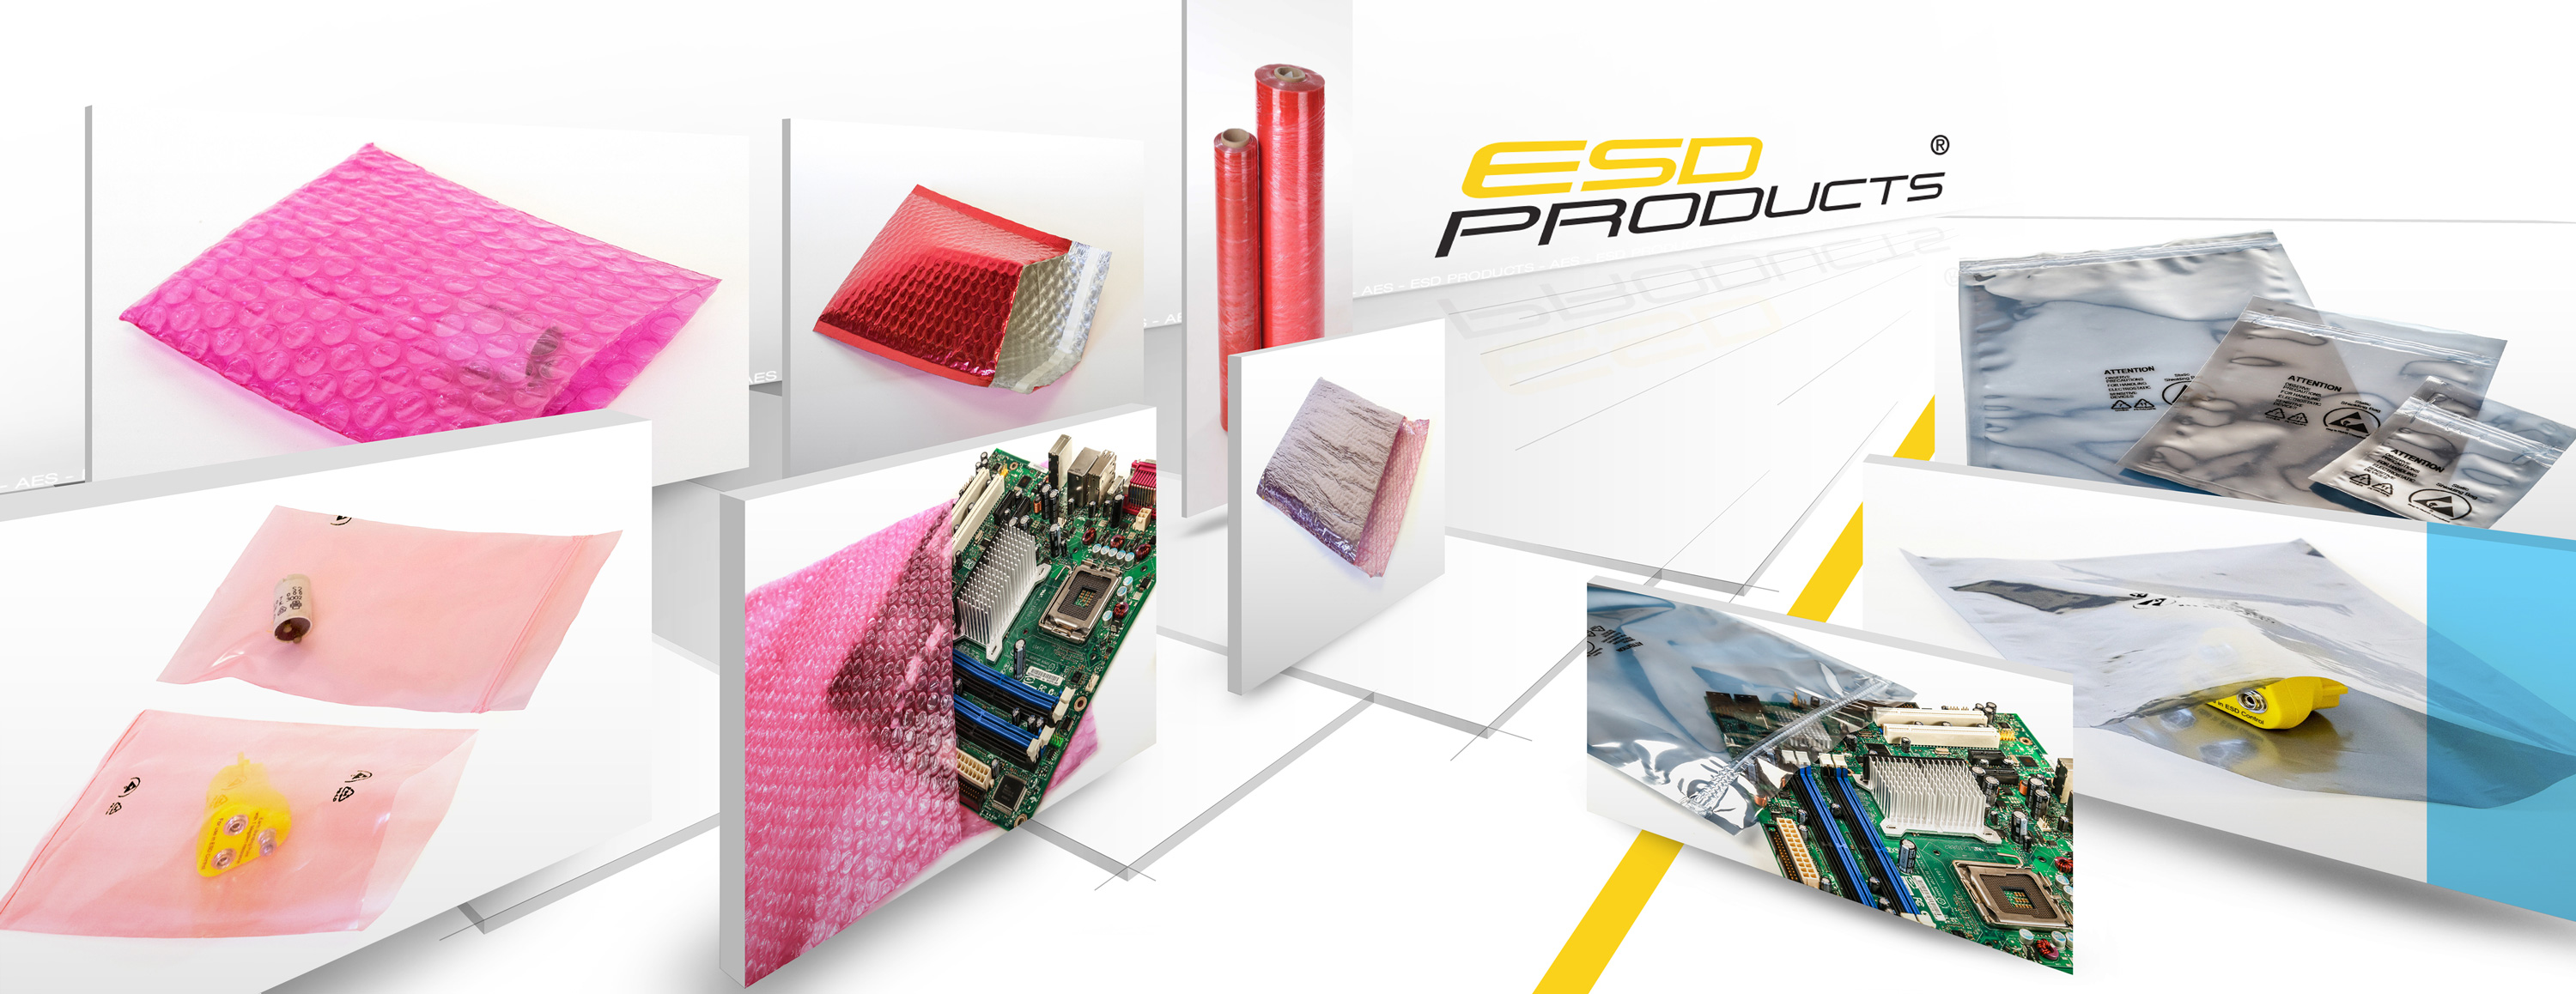 http://www.anti-static-esd-solutions.com/userfiles/upload/images/Antistatic%20ESD%20Shielding%20Bags%20Pink%20poly%20bag%20dissipative%20AES%20MOISTURE%20BARRIER%20Dri%20Shield%20Flexible%20Packaging_3000x1158_08_fin_rew.jpg